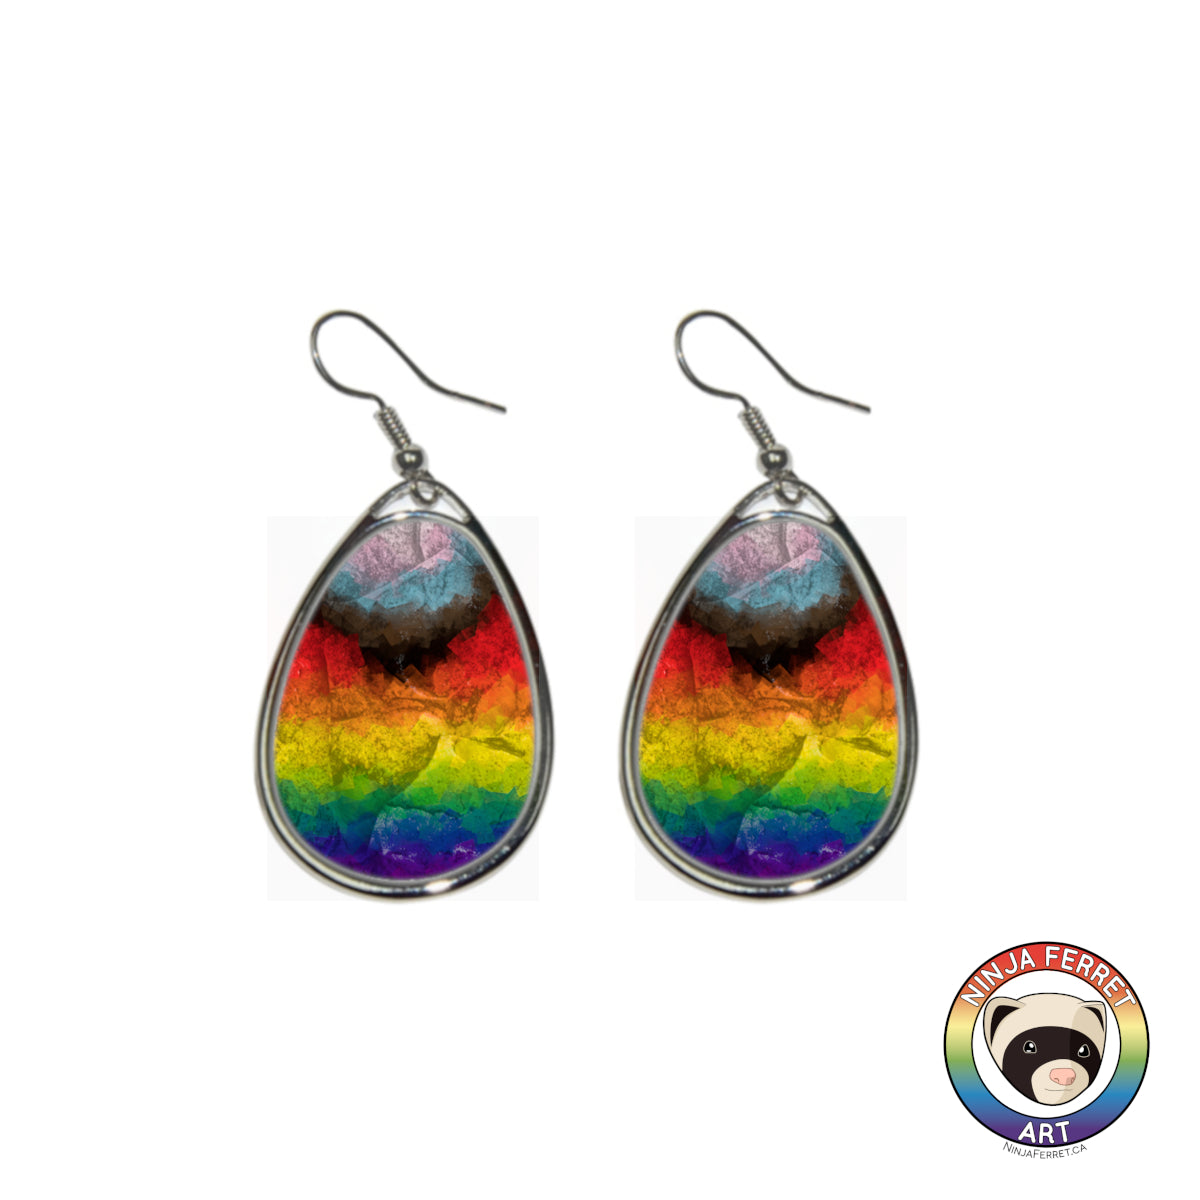 Faux Stone Rainbow Pride Oval Earrings | Choose Your Colourway